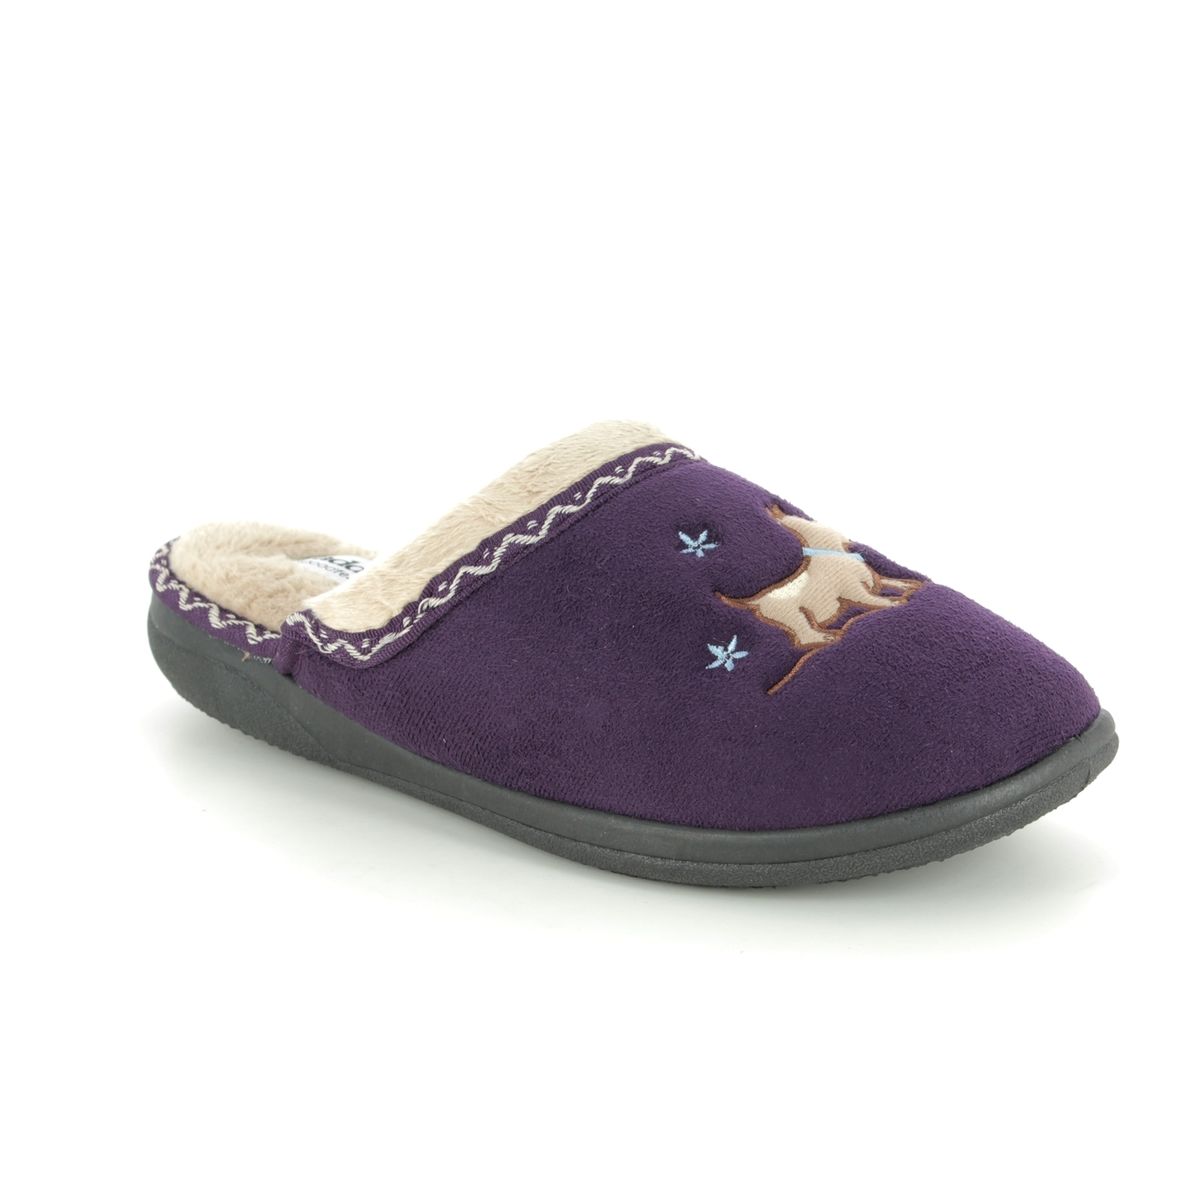 Padders Scotty Ee Fit Purple Womens slippers 479-95 in a Plain Microsuede in Size 4